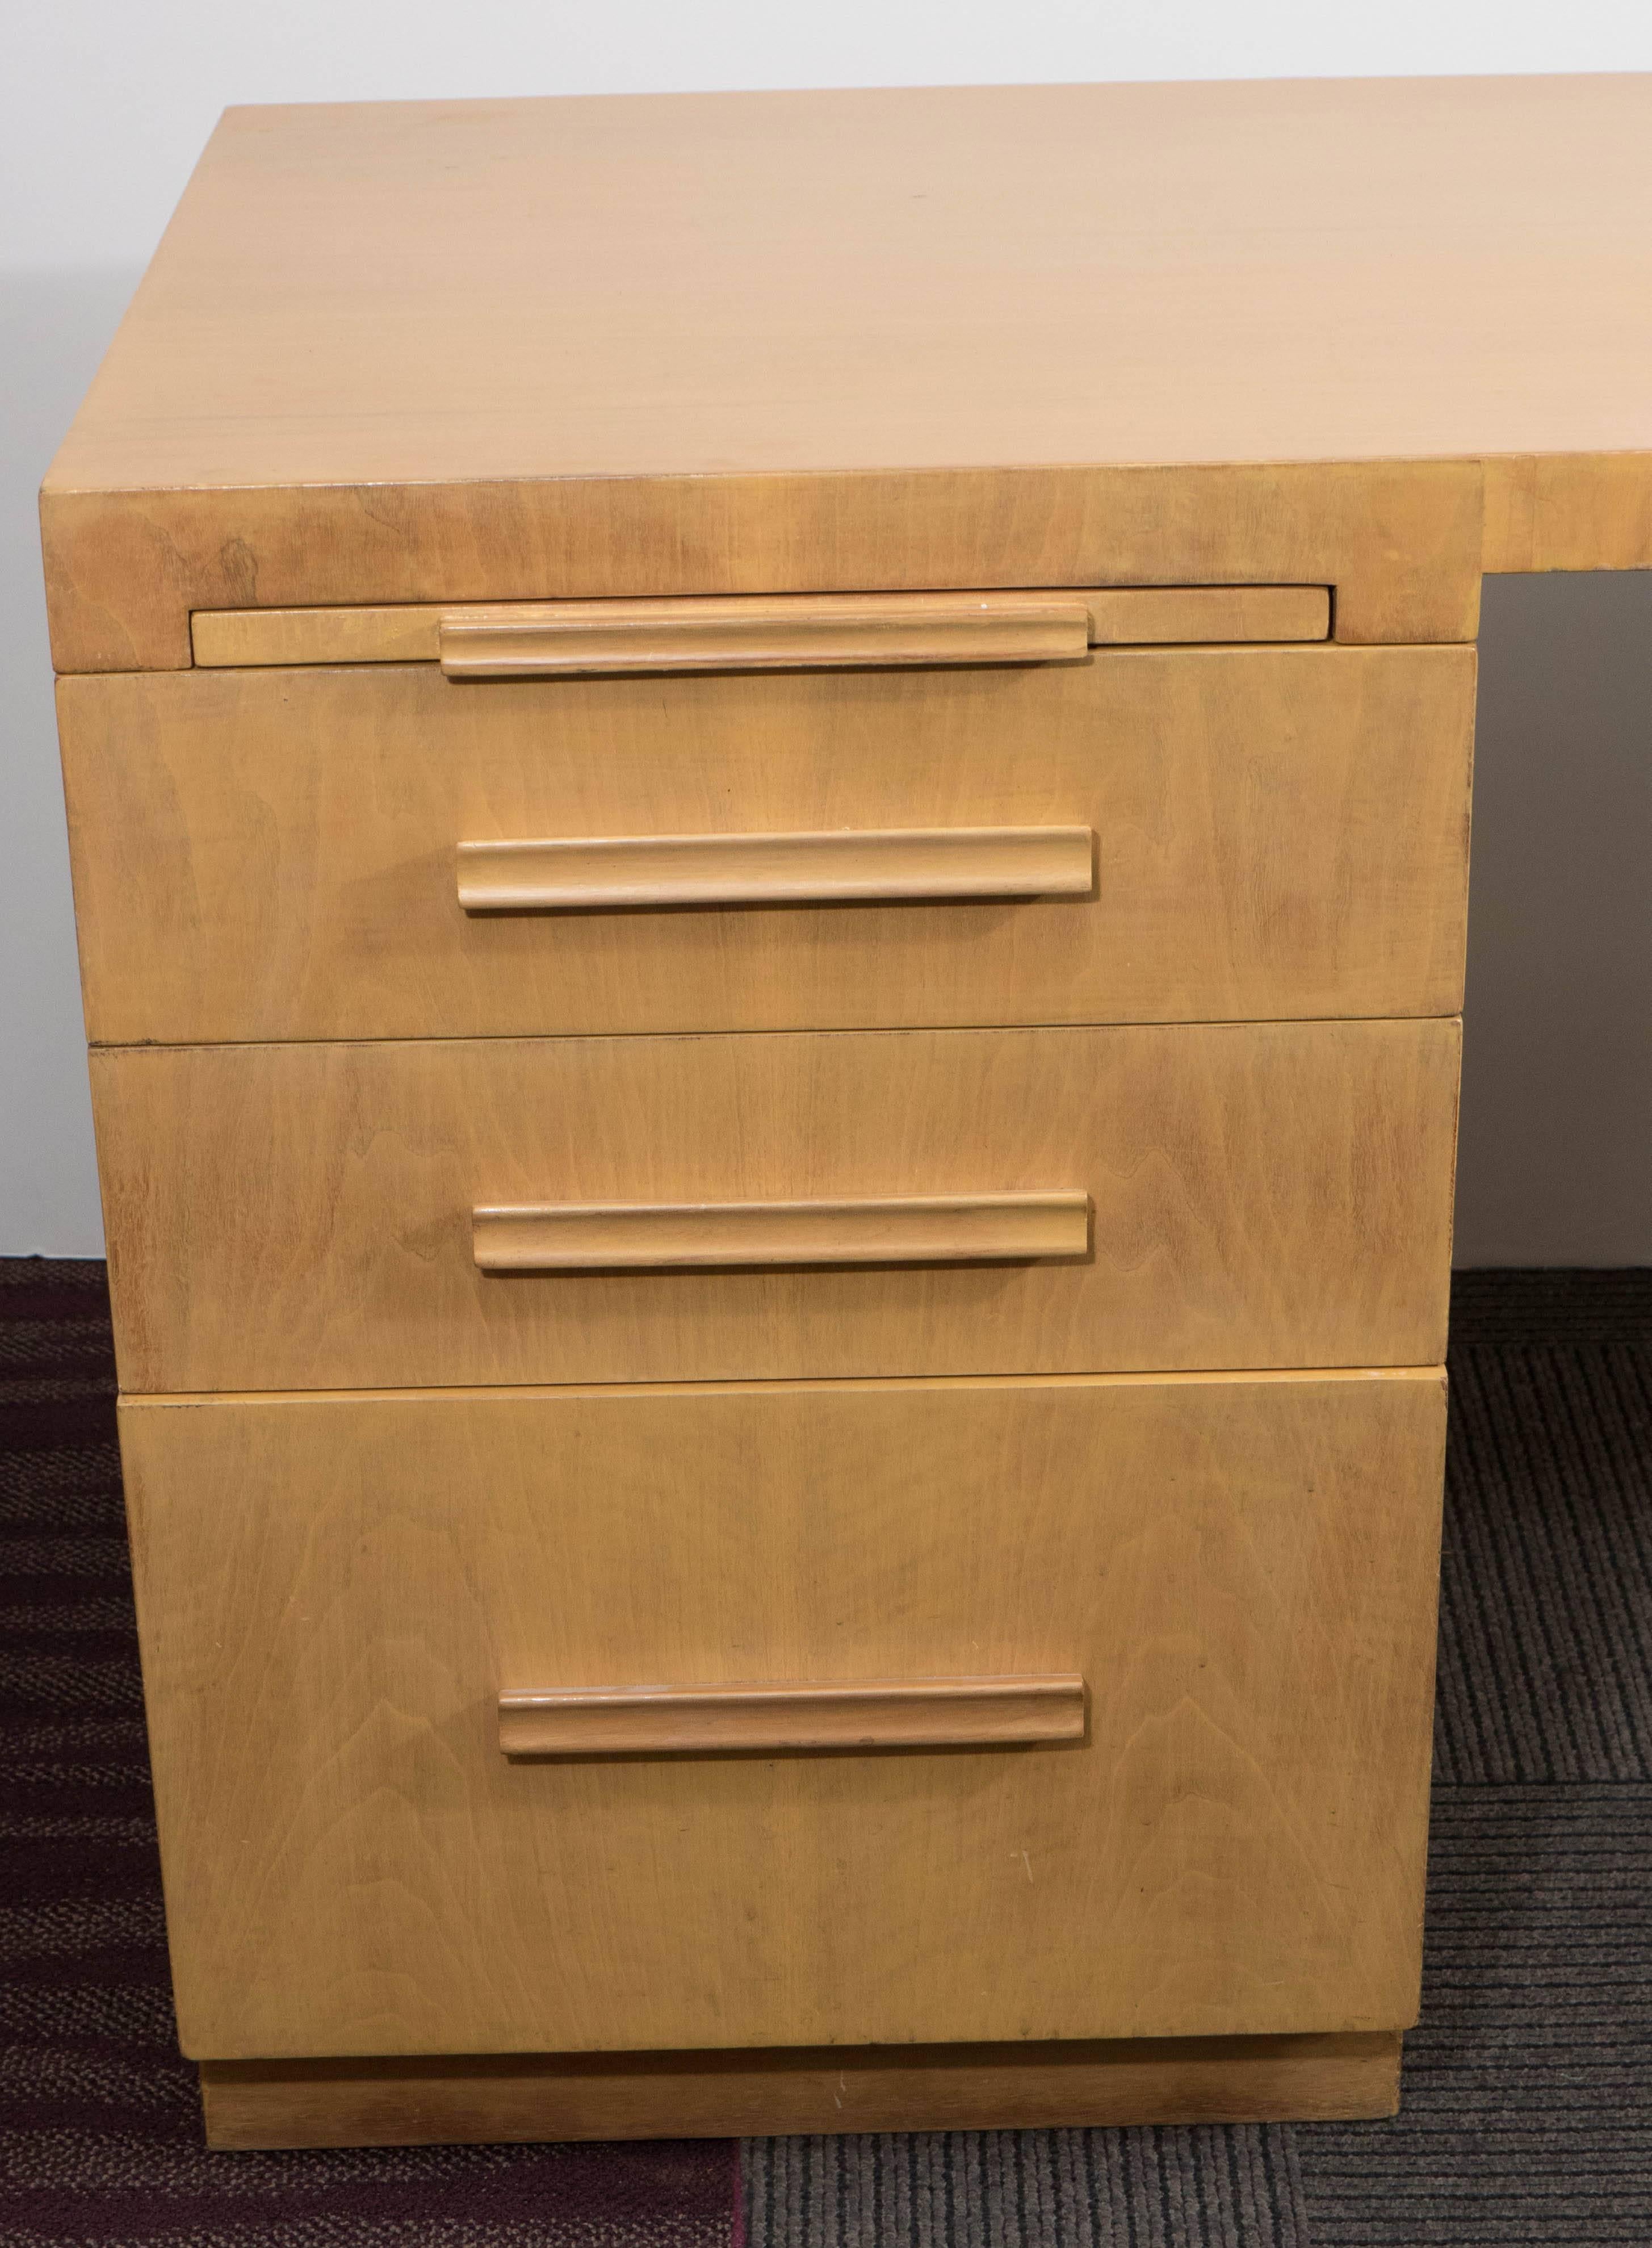 This wonderfully modern executive desk by designer T.H. Robsjohn-Gibbings for Widdicomb, comes in vibrant birch, with three graduated drawers and pull-out writing surface, supporting a curved streamlined top on opposite single tapered leg. Markings